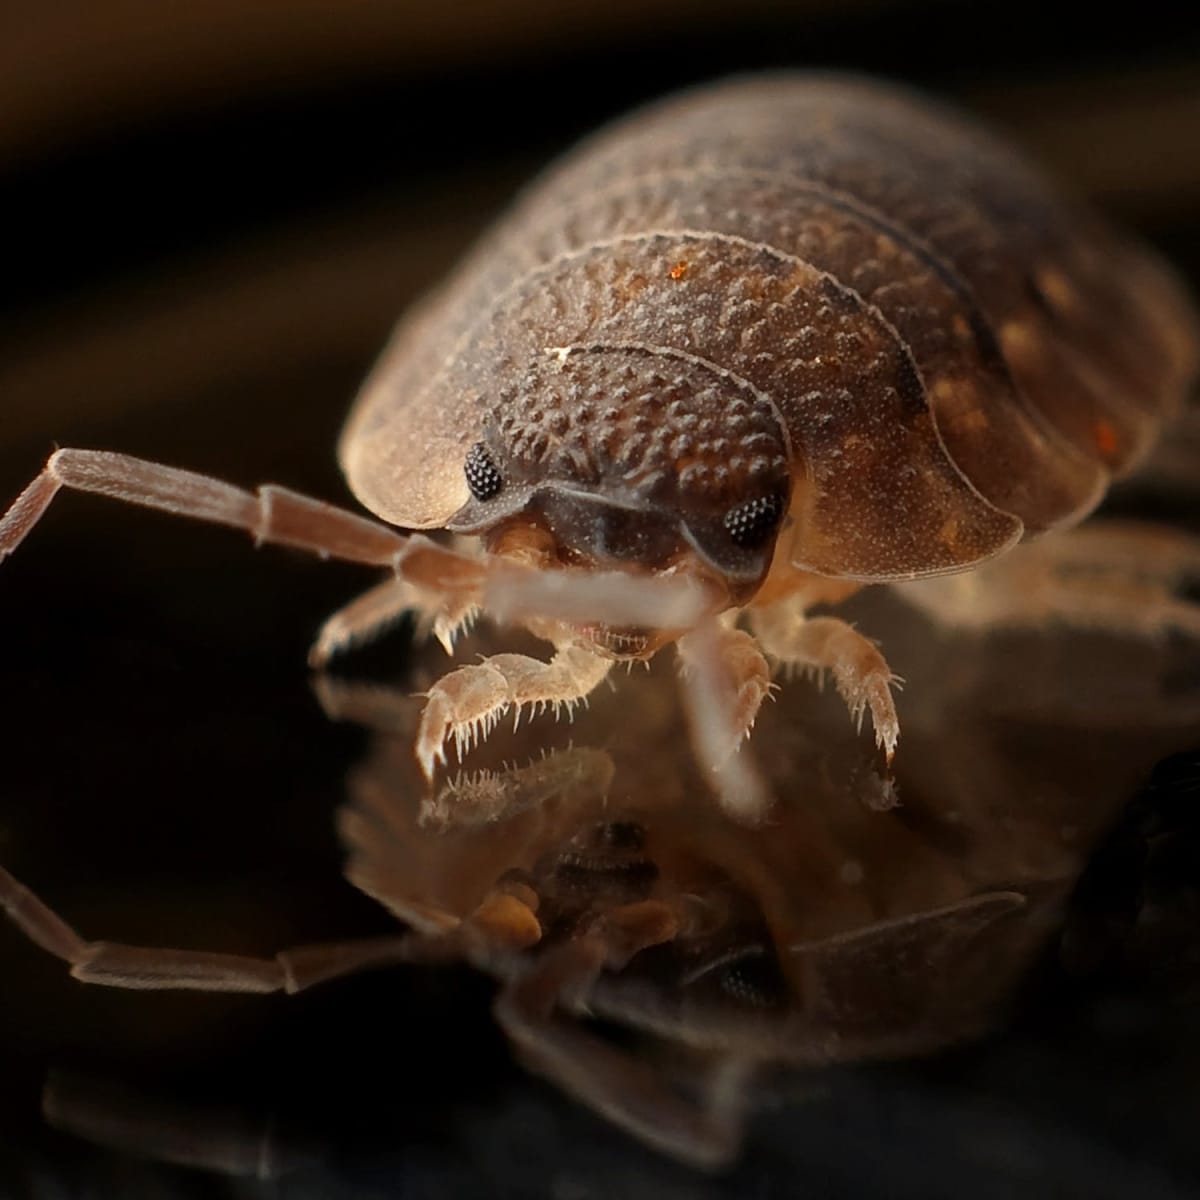 Bedbugs: What travelers need to know